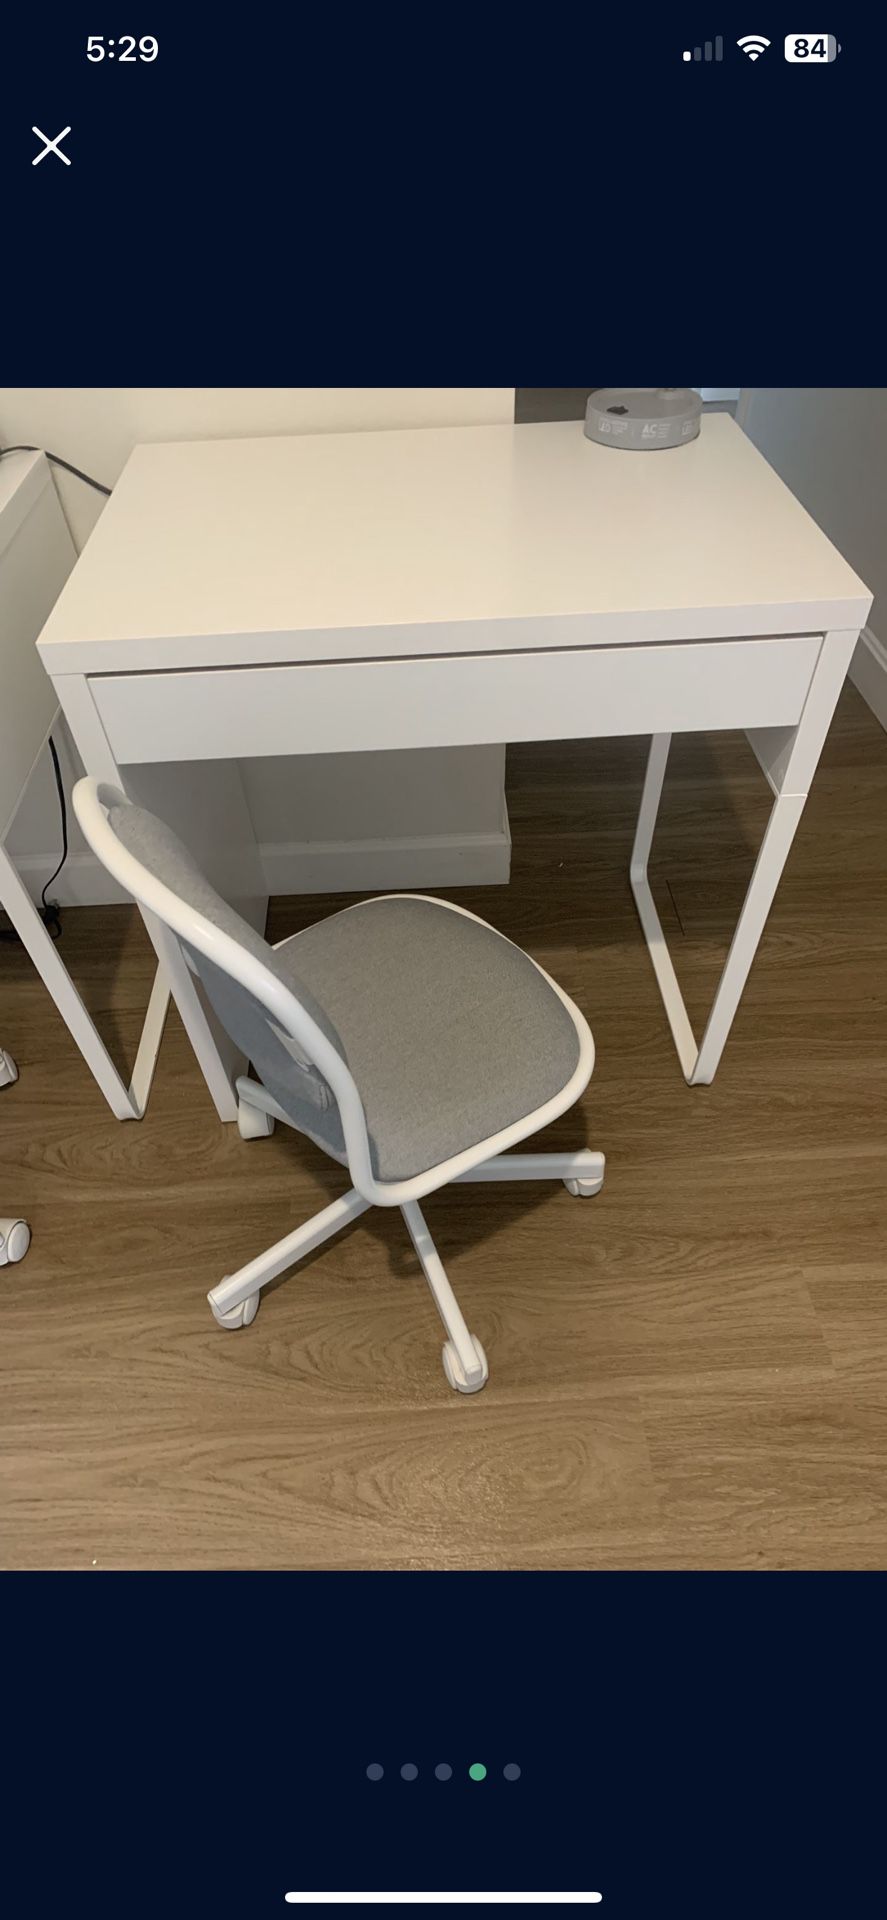 New Desk For Kids Included Chair And Desk And Lamp And Trash 🗑️ Everything Still New Never Used 